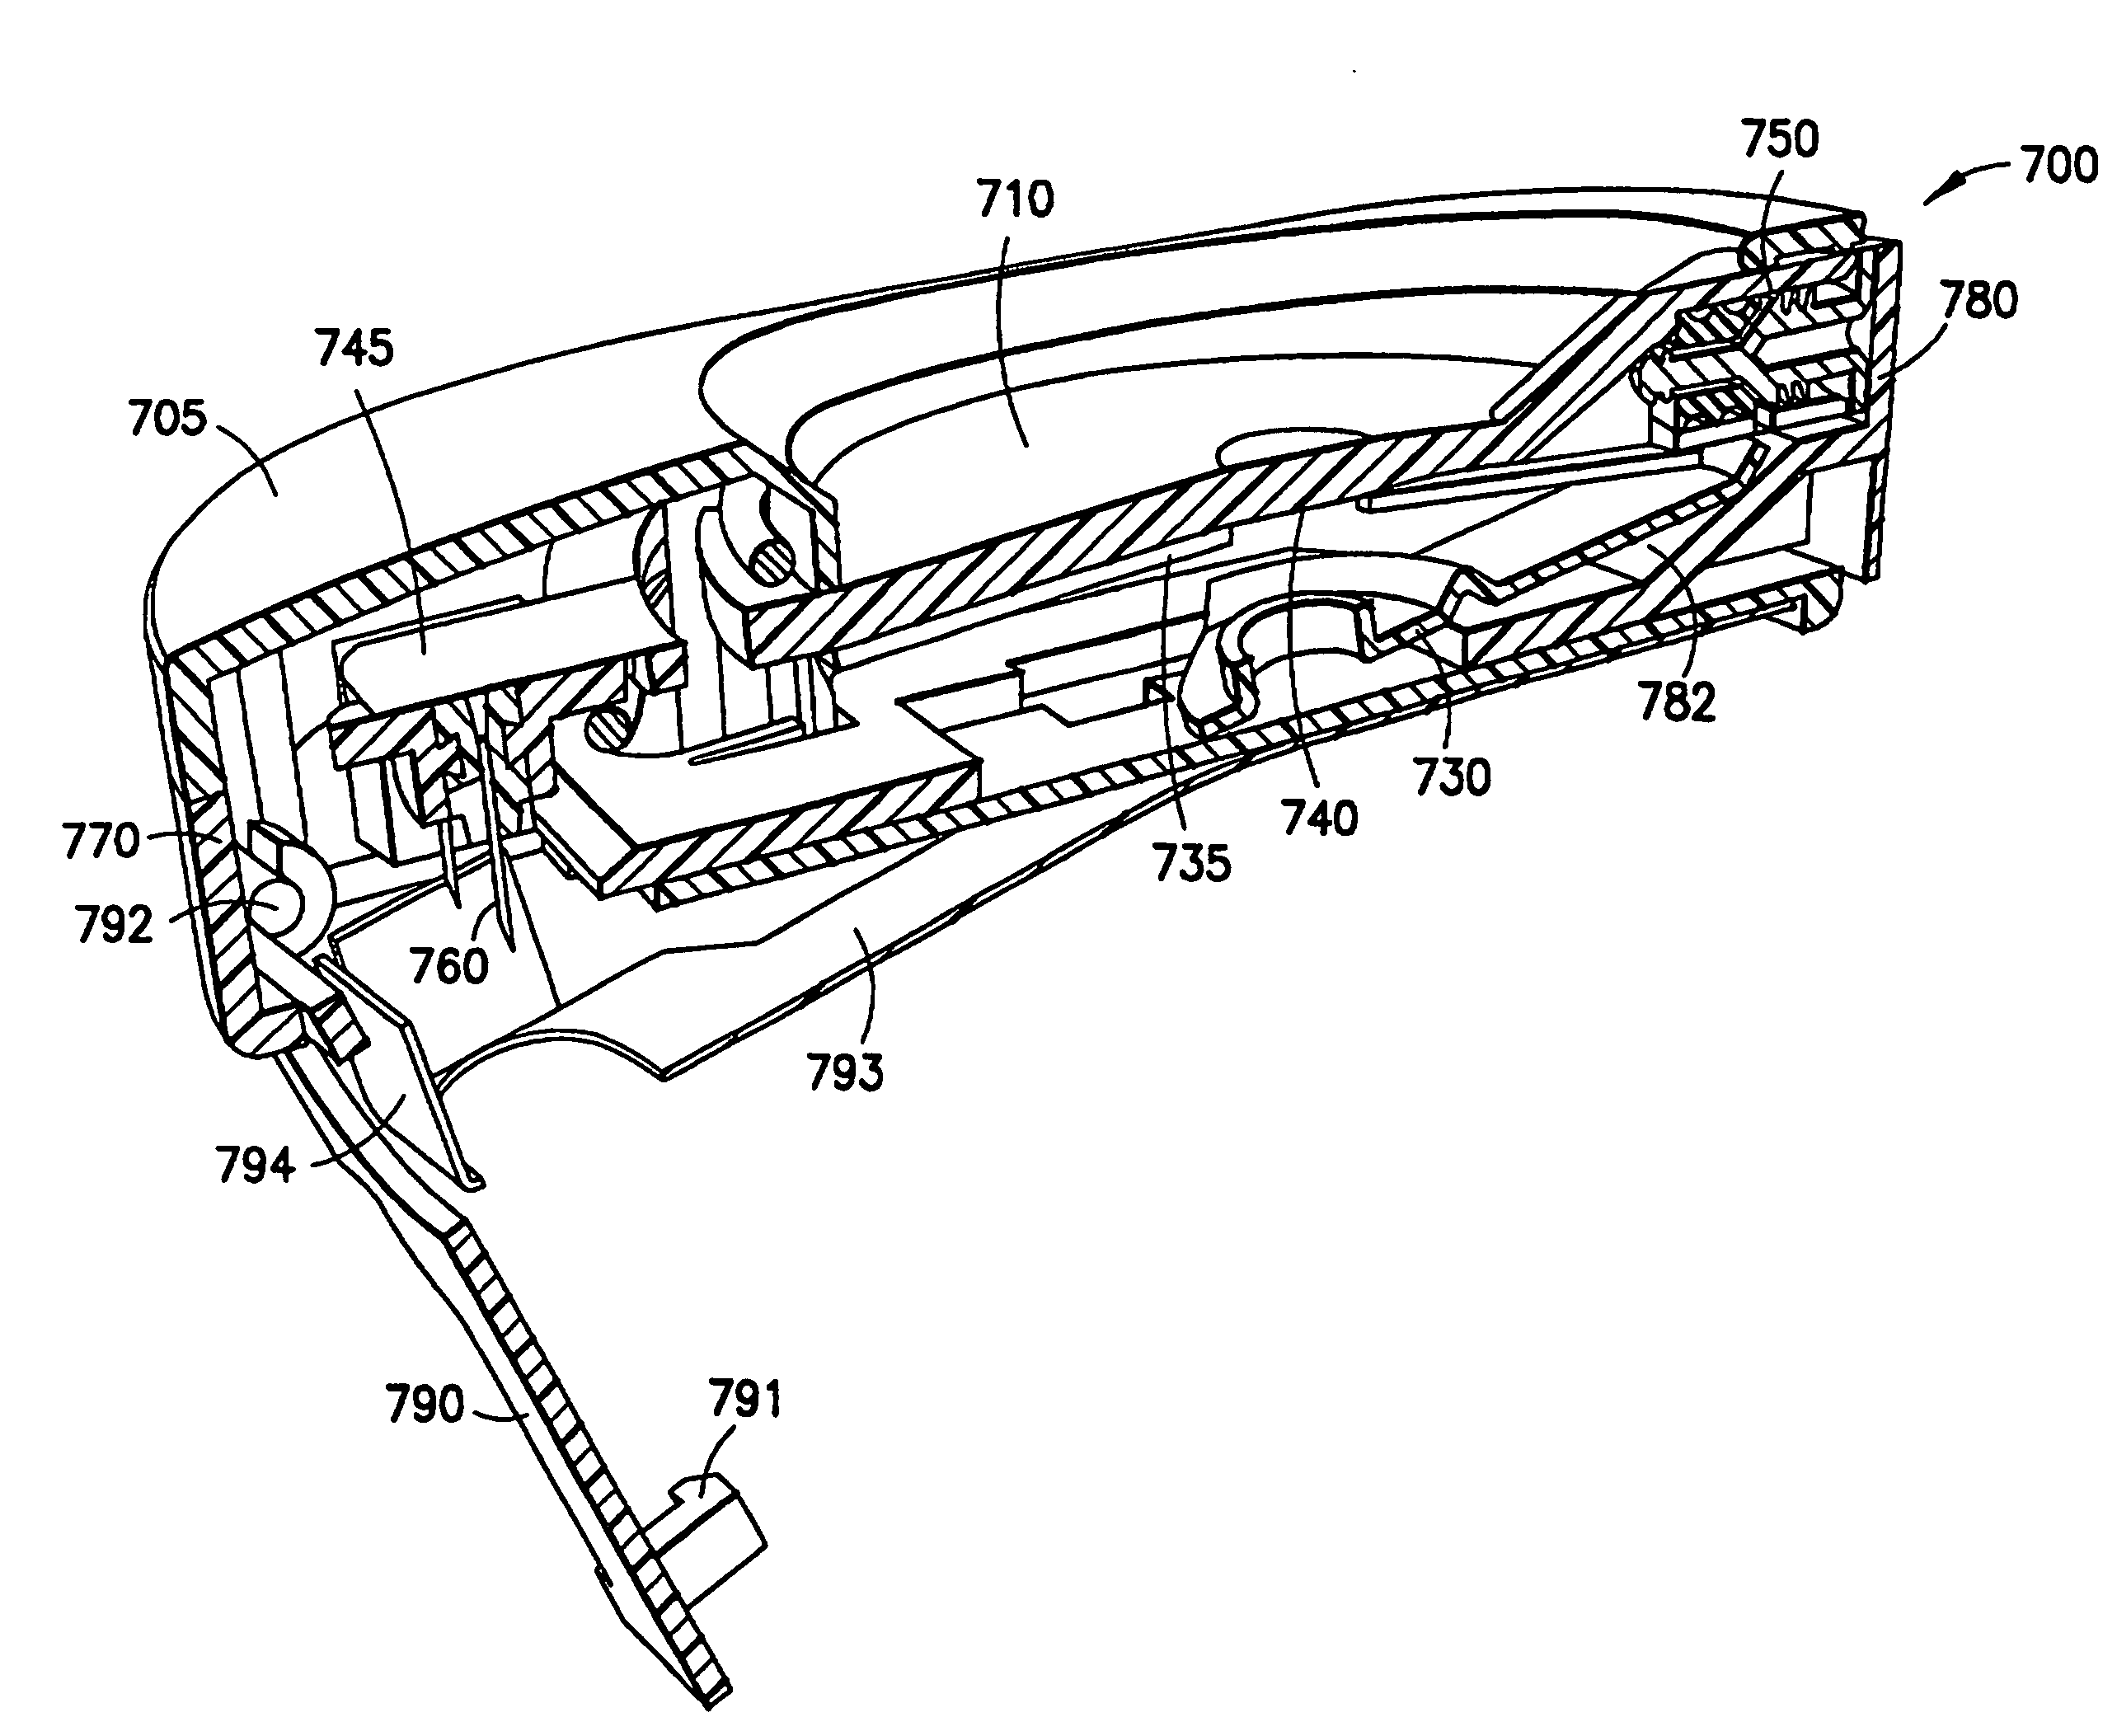 Patch-Like Infusion Device